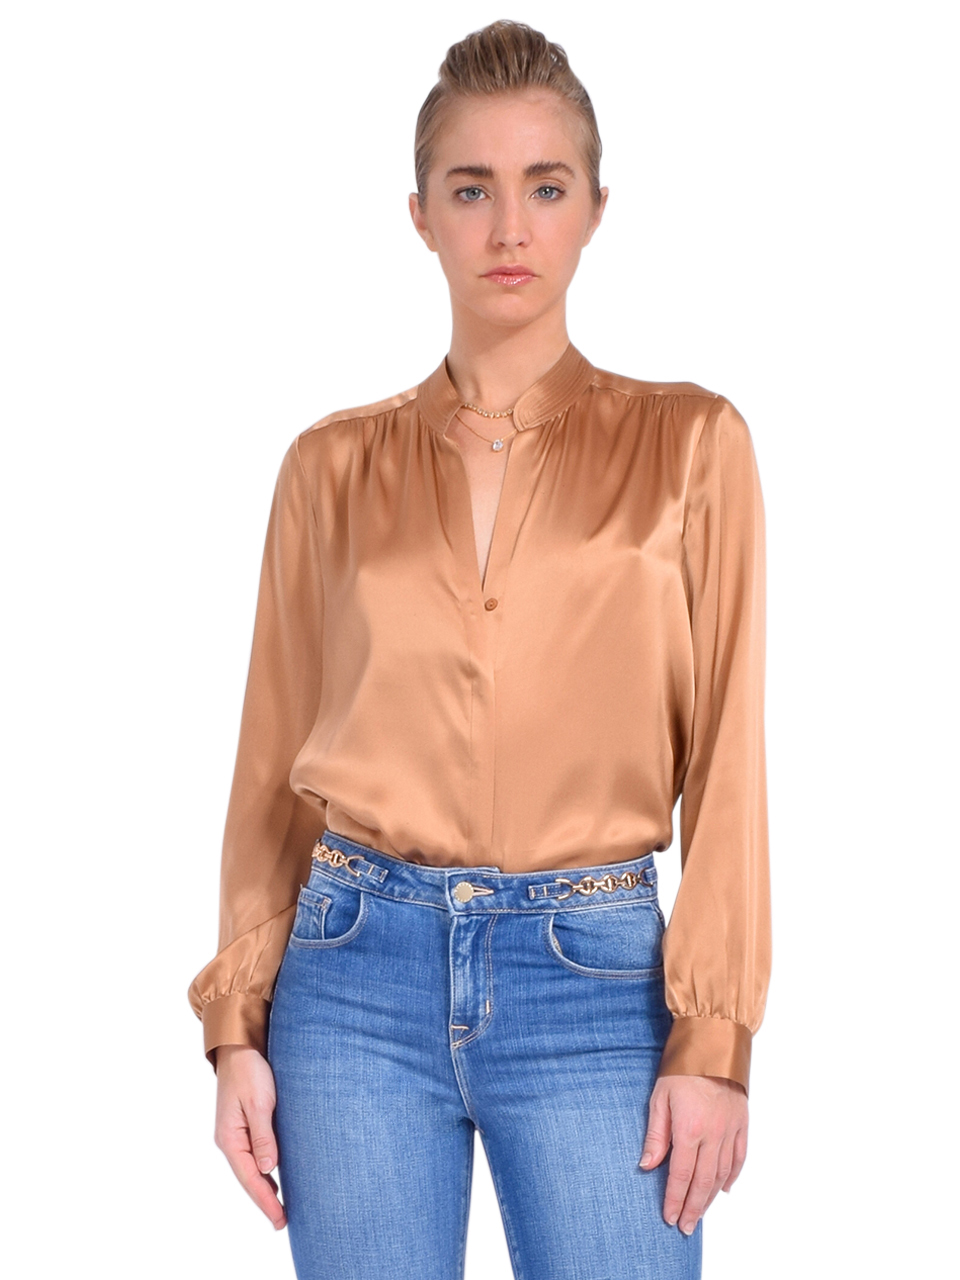 L'AGENCE Bianca Band Collar Blouse in Soft Tan Front View 